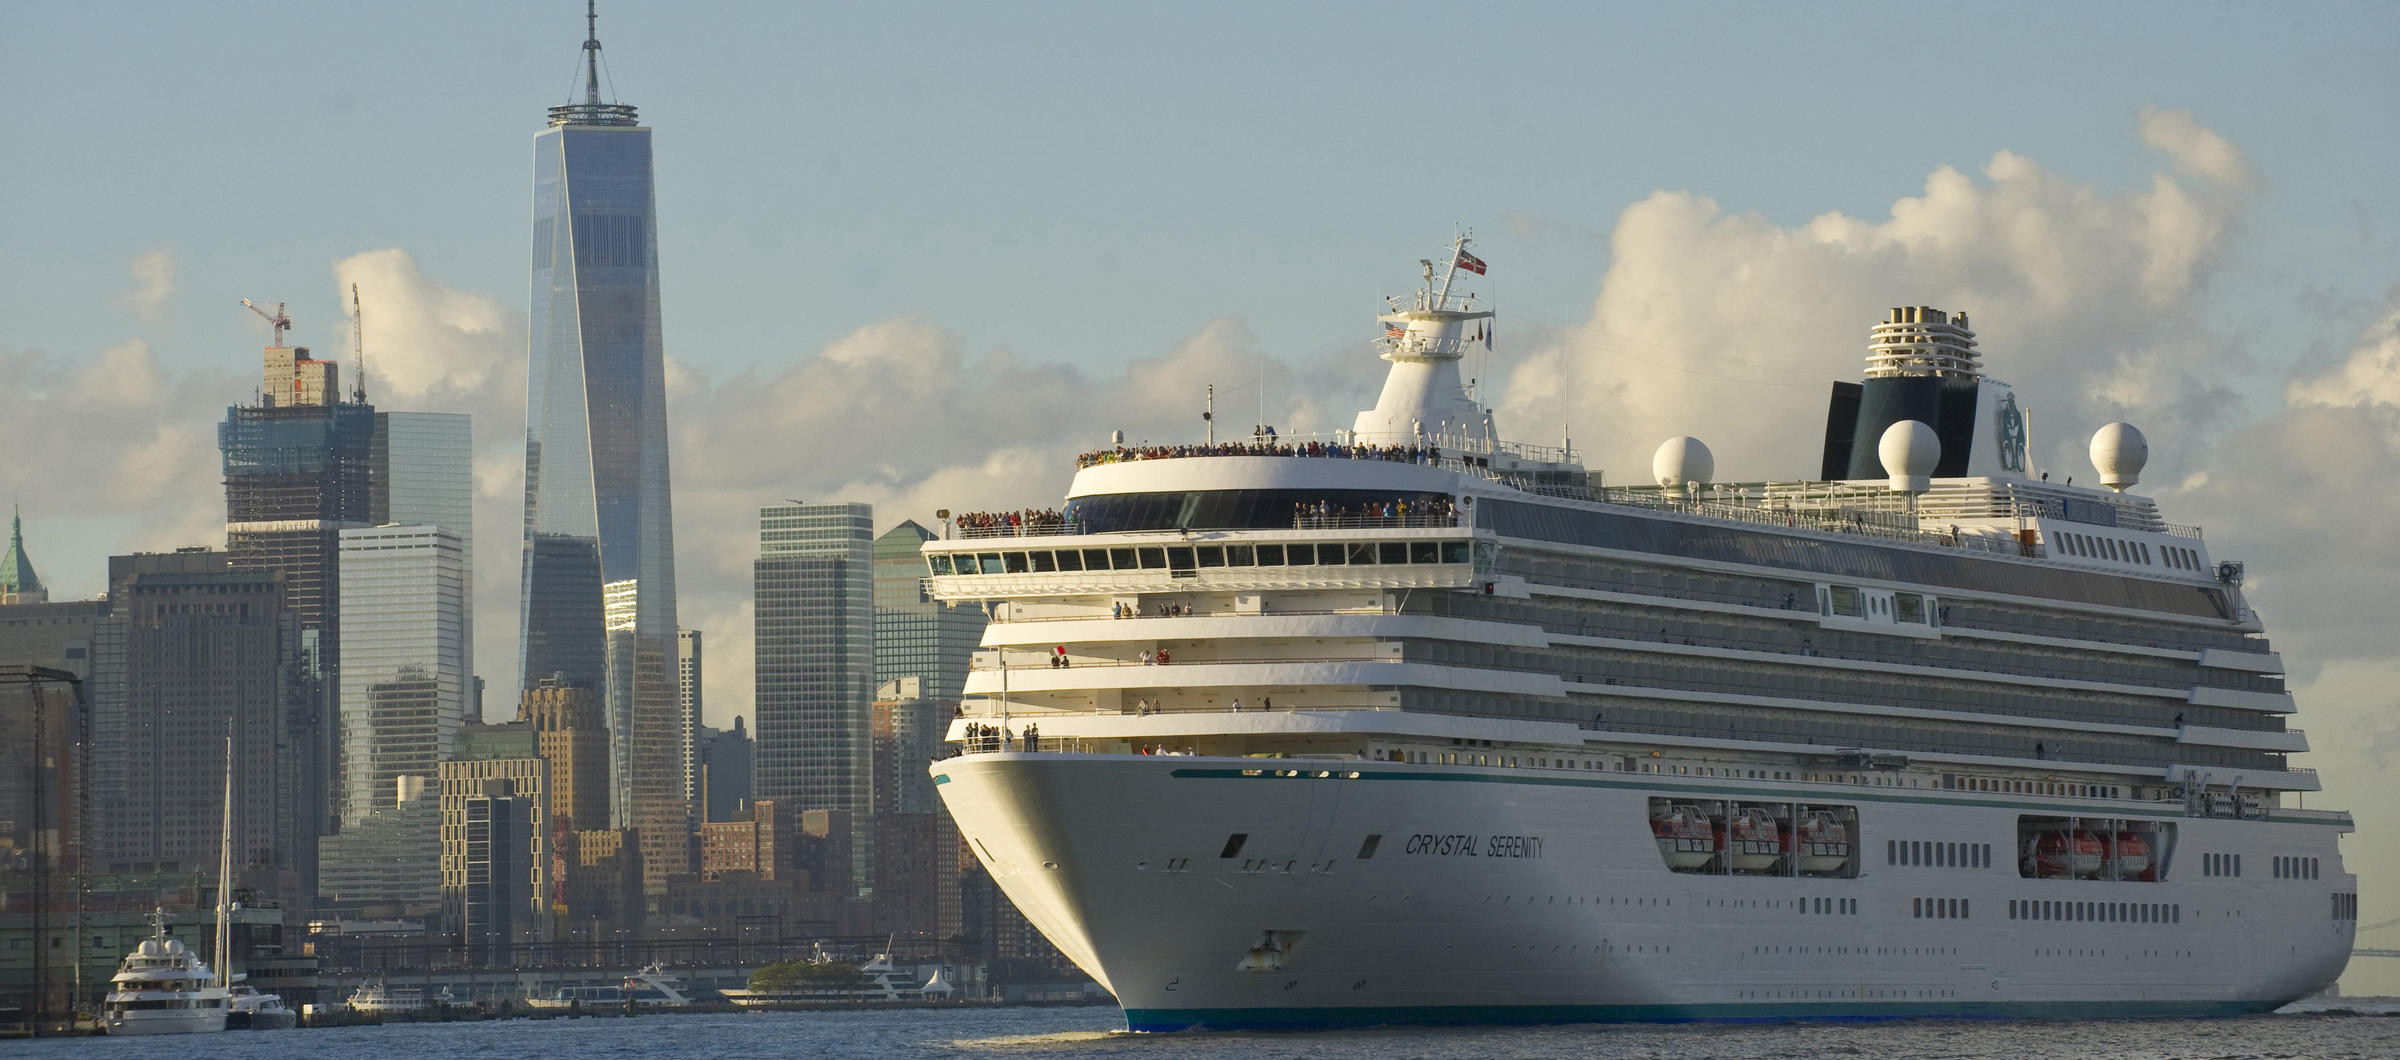 With the Freedom Tower looming in the background, the Crystal Serenity pulls into New York Harbor on Sept. 16, at the end of a 32-day cruise around Alaska and through the Northwest Passage. (Photo courtesy ofCrystal Cruises)